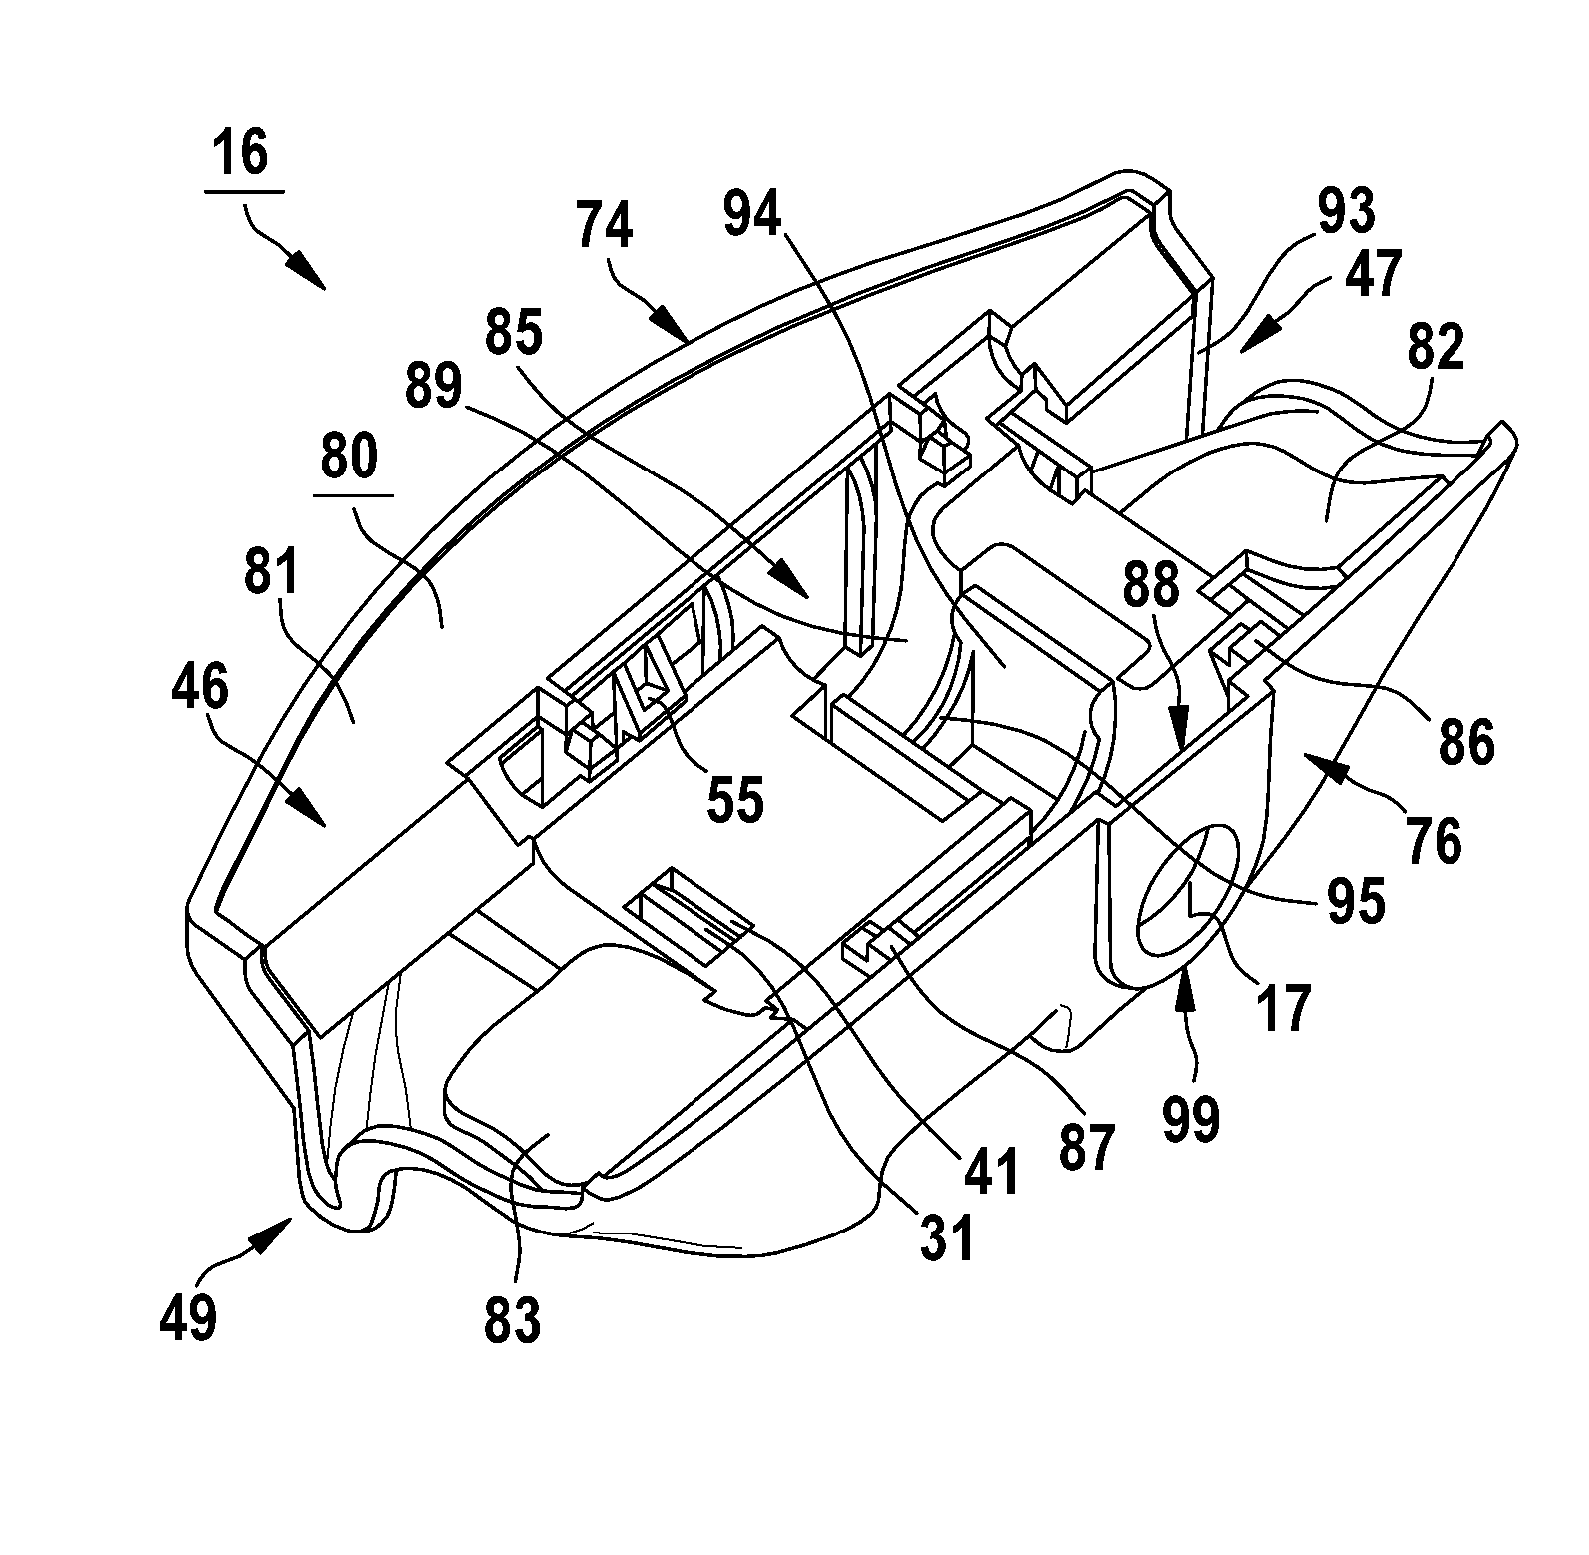 Wiper blade having connection component for linking to wiper arm